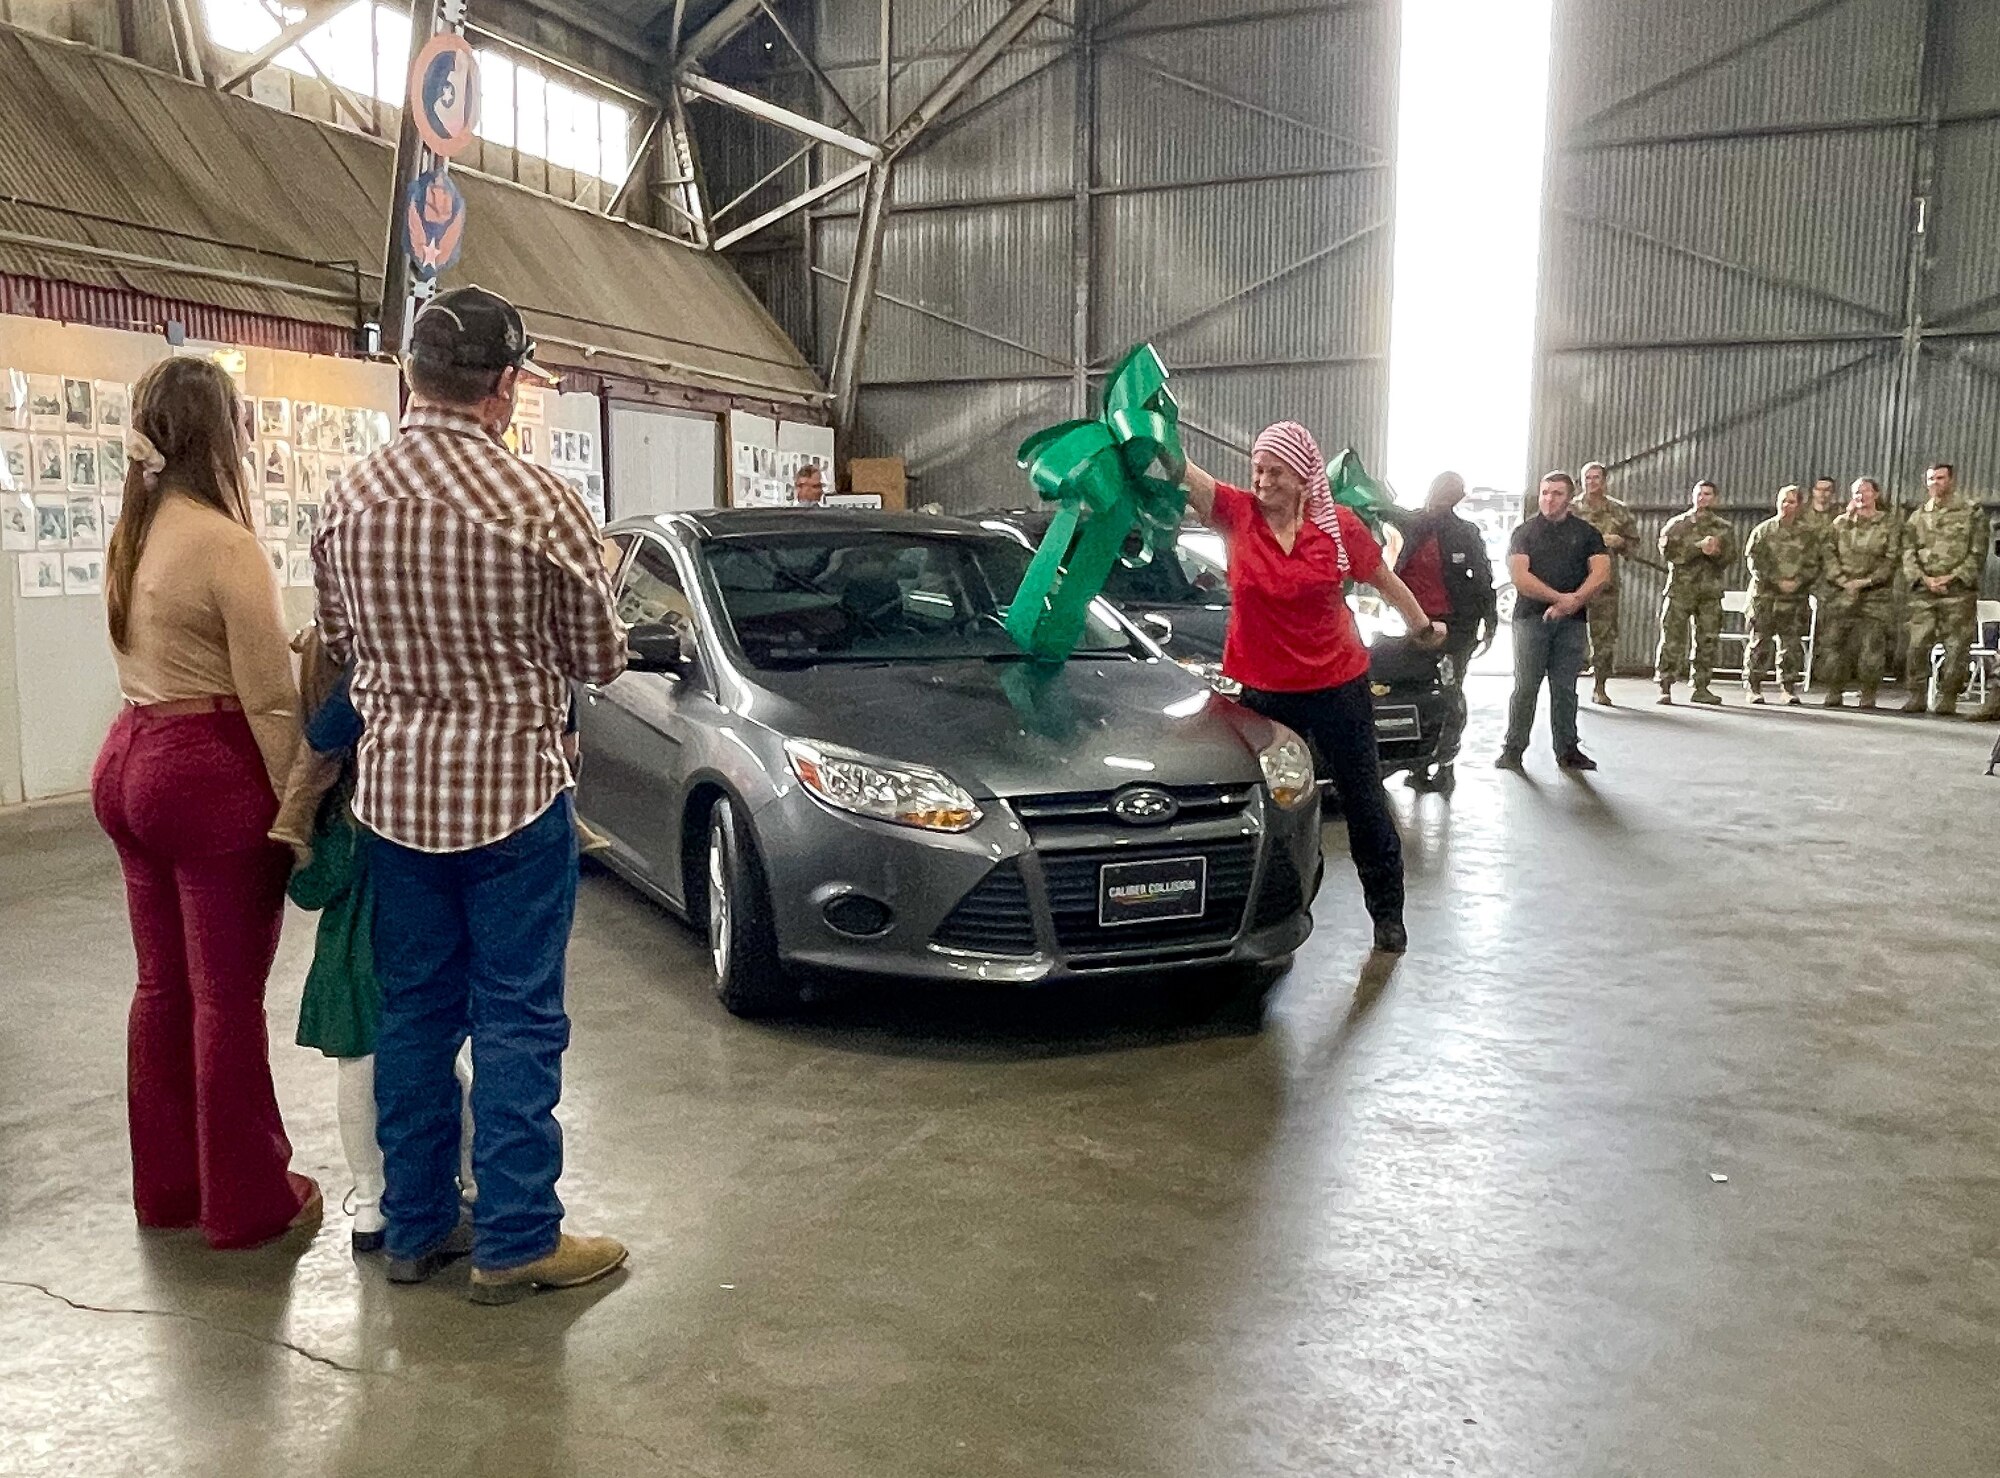 Members of the 301st Fighter Wing, along with wing senior leadership, participated in the sixth annual Holidays & Heroes community event at the Vintage Flying Museum in Fort Worth, Texas on Dec. 5, 2021.